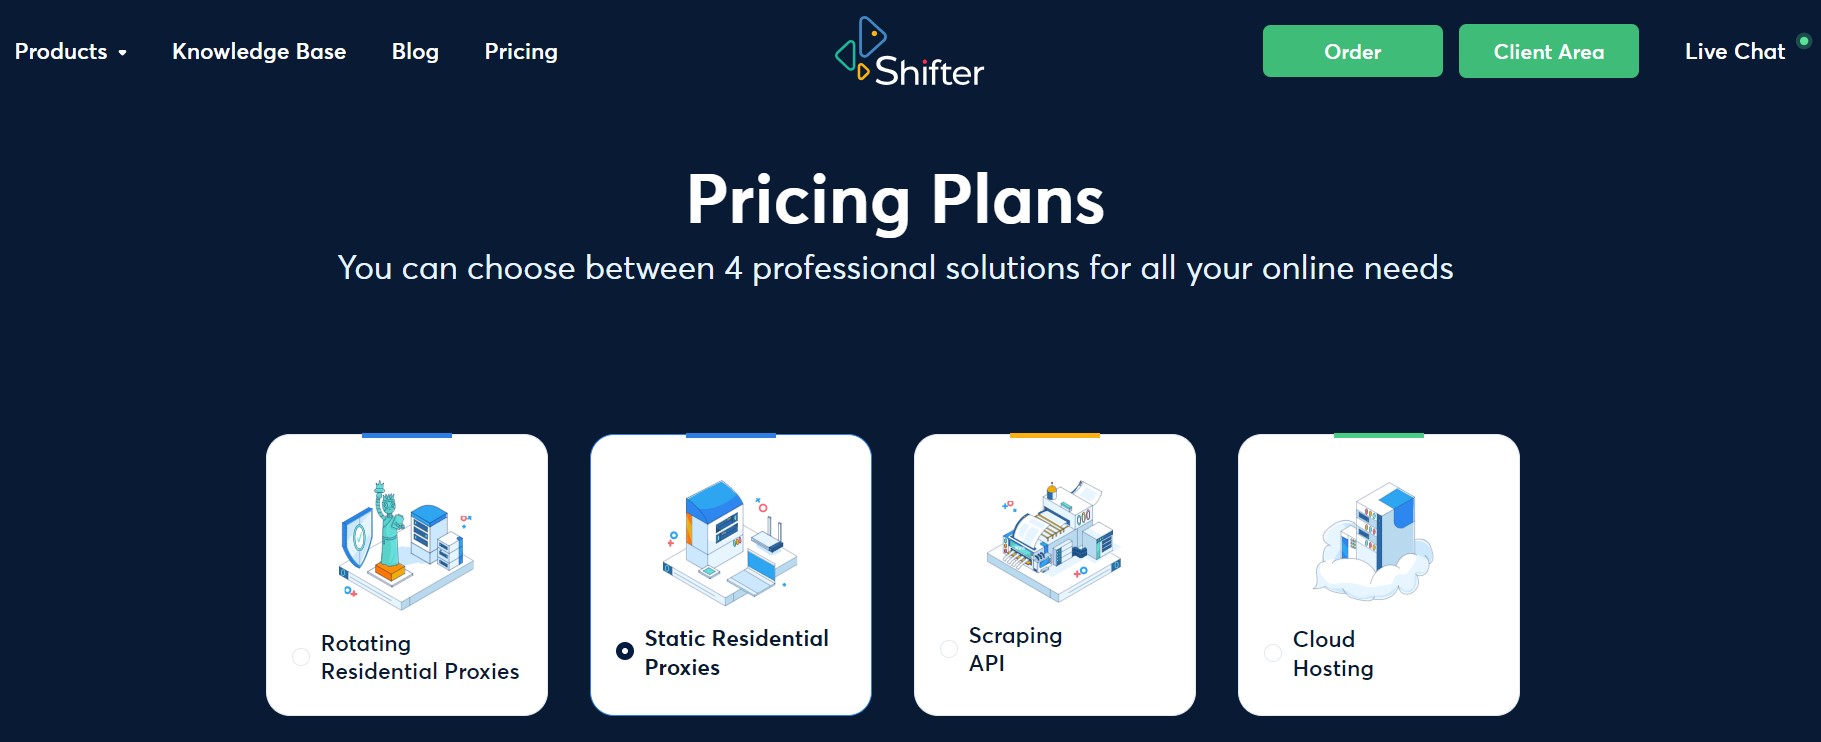 Shifter residential proxies